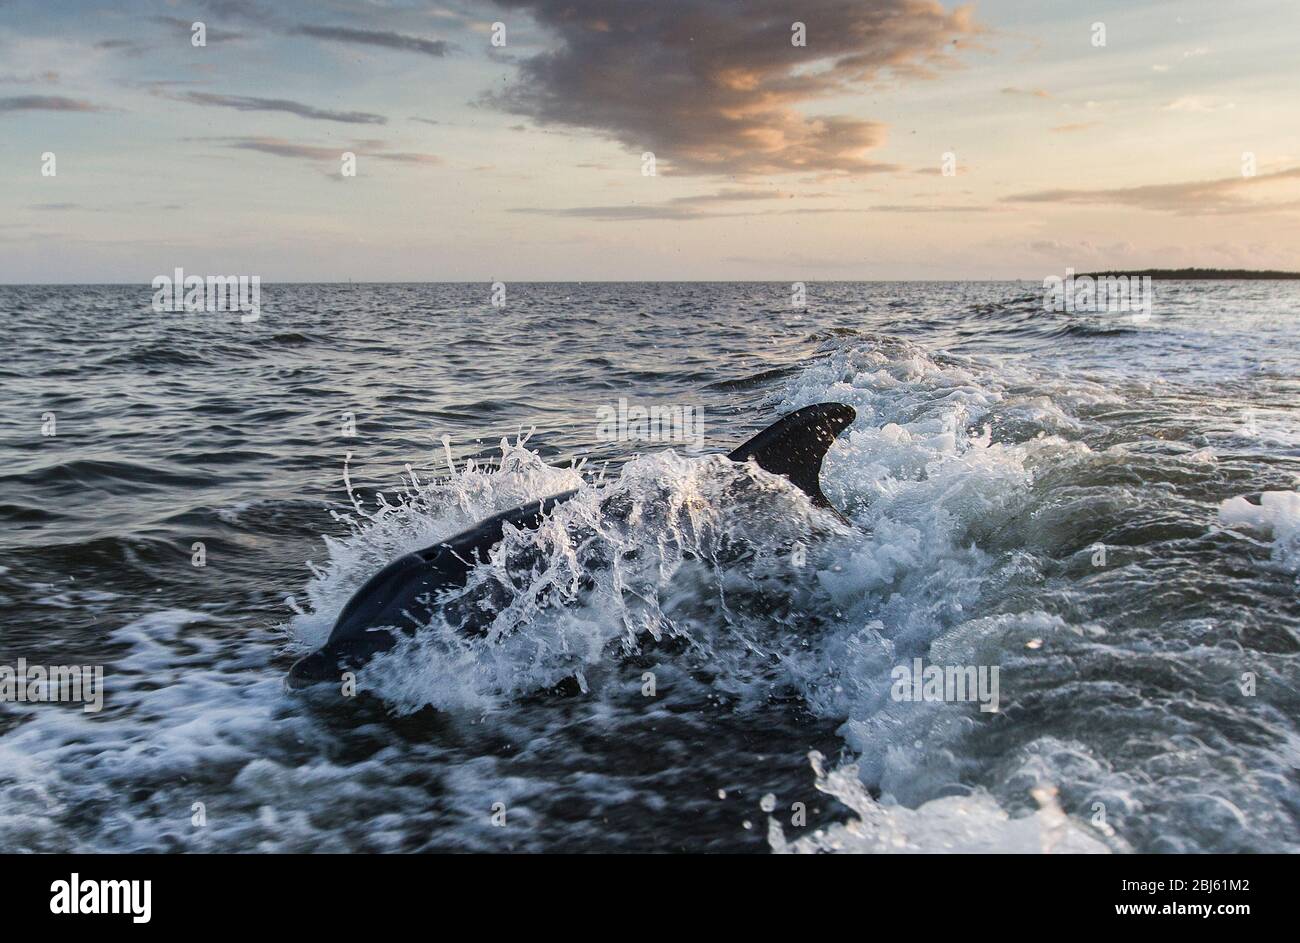 Bottle Nosed Dolphin swimming in a boats wake during sunset Stock Photo